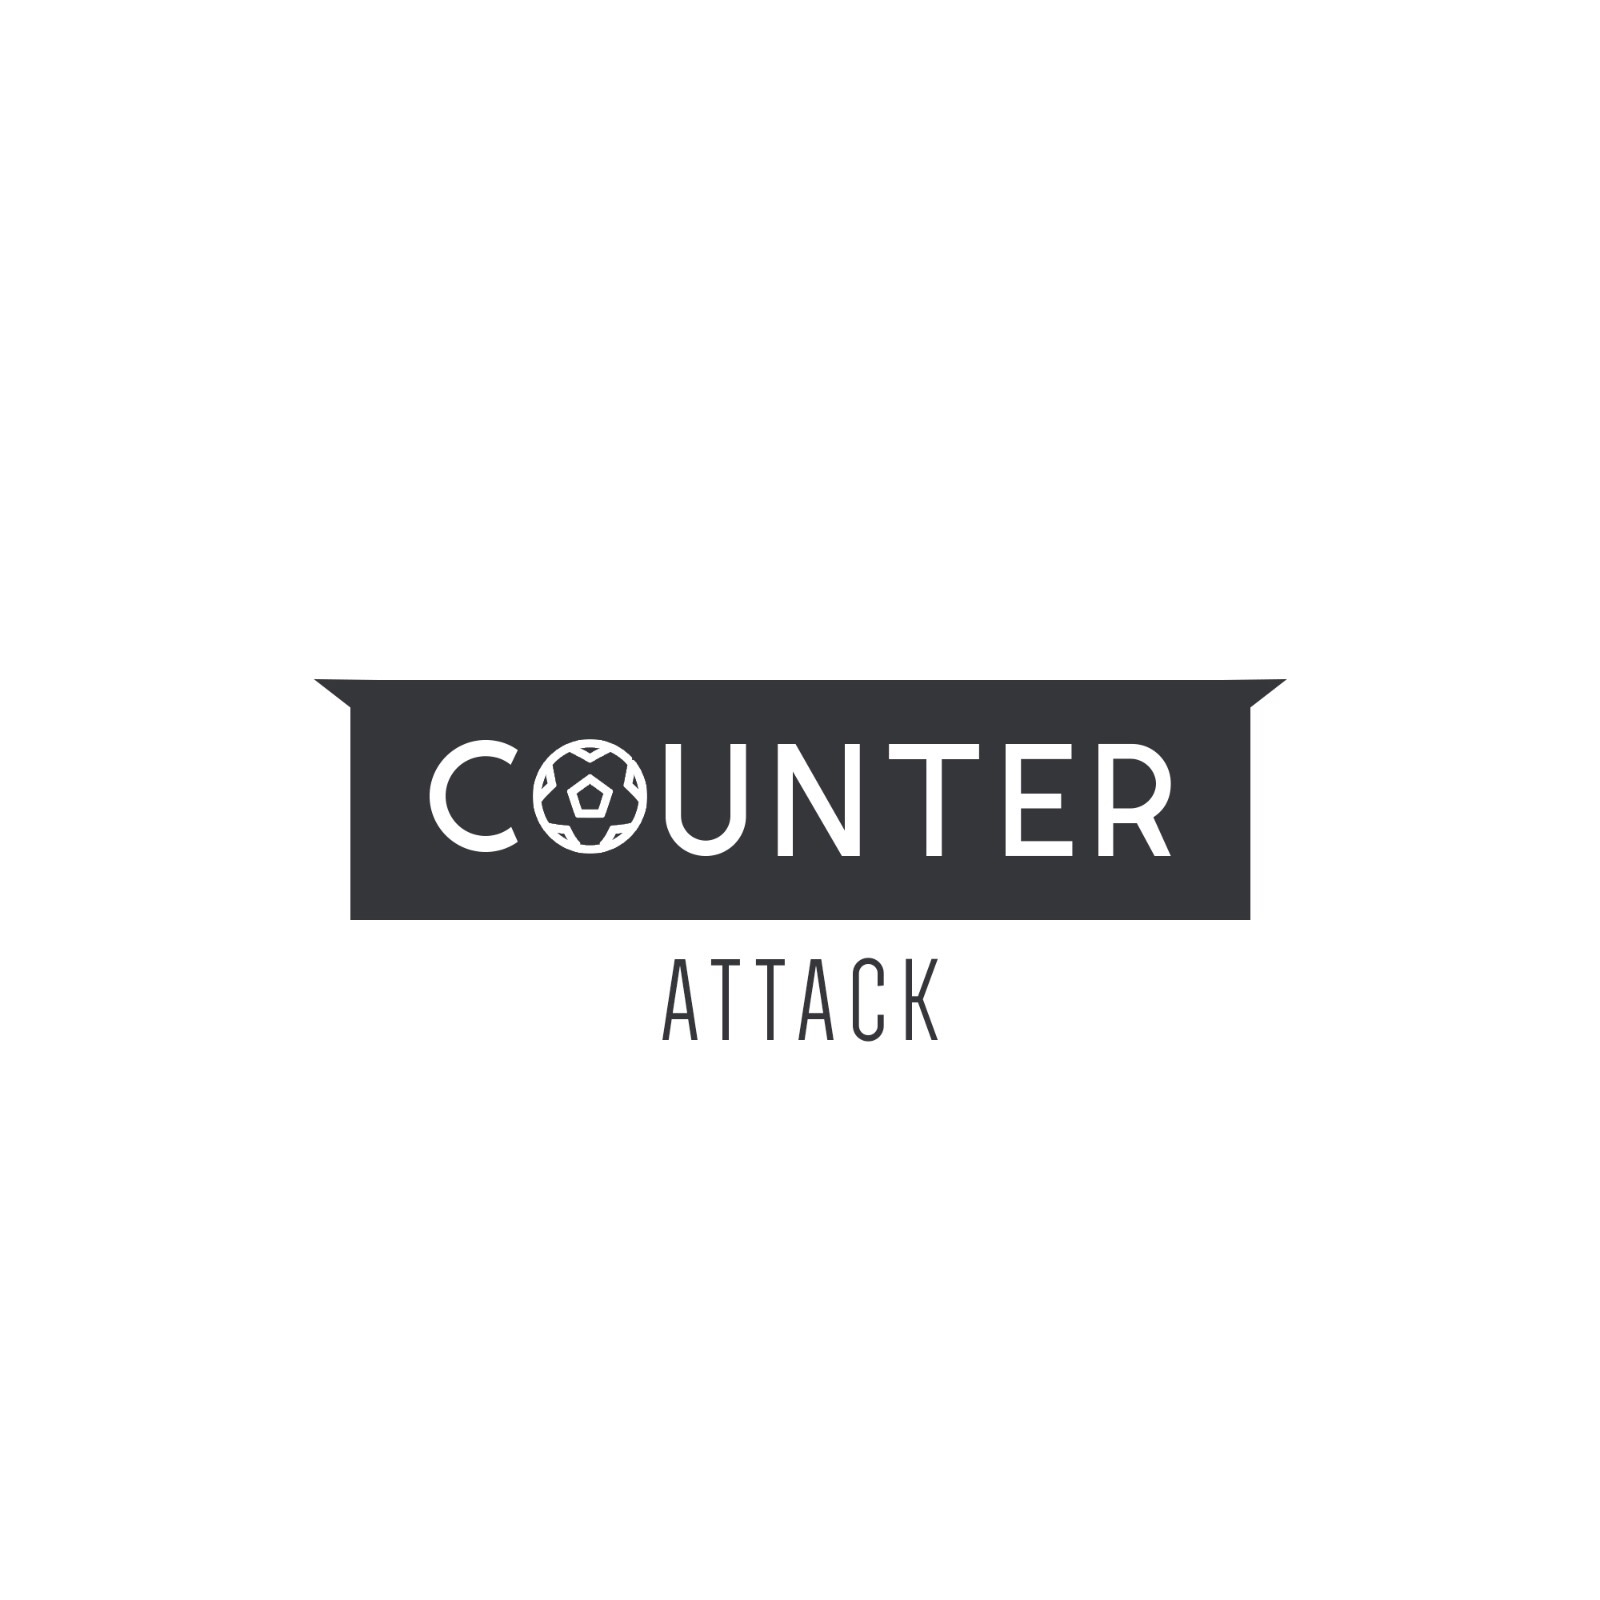 Counter Attack - Episode 127 - Daps and Rants' Weekend Round Up